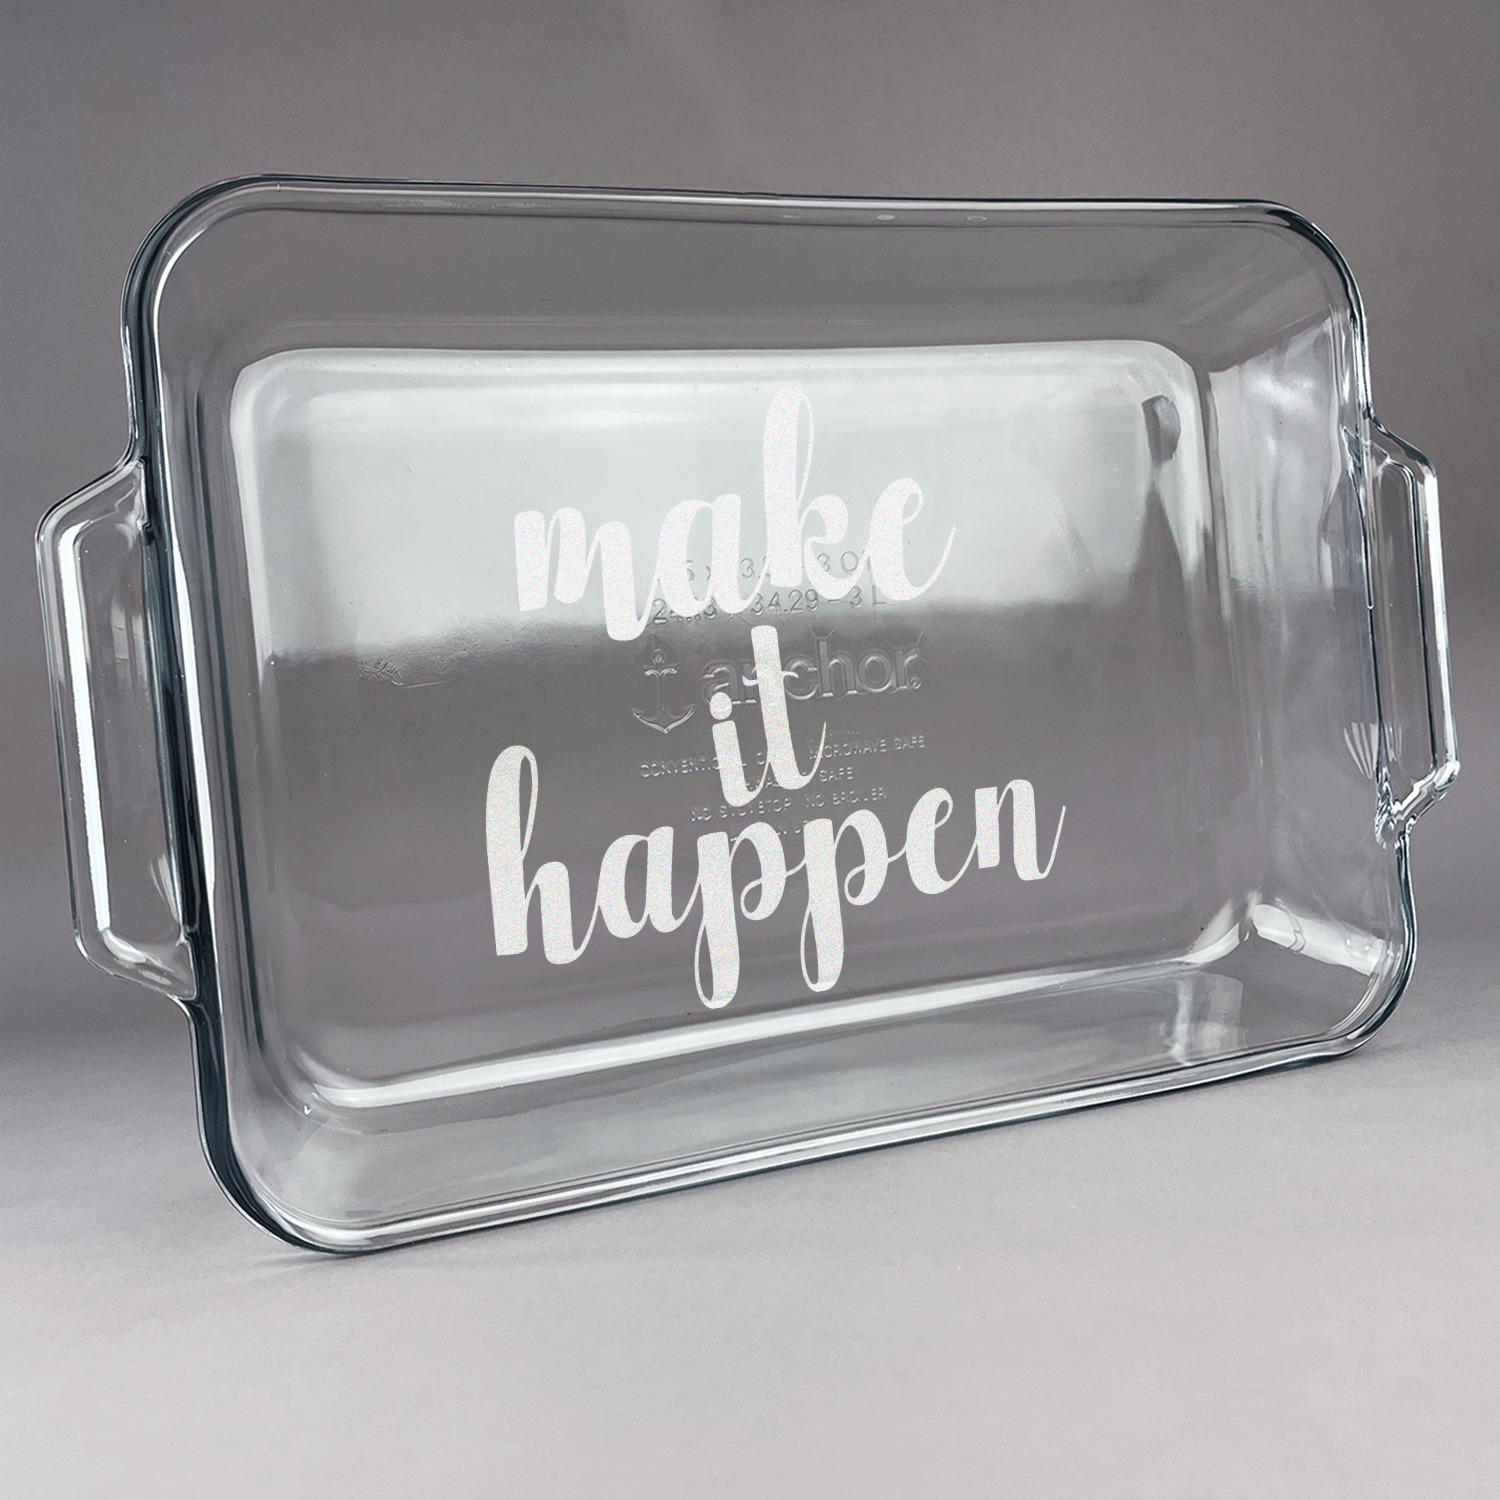 How to Glass Etch Casserole Dish using Your Cricut